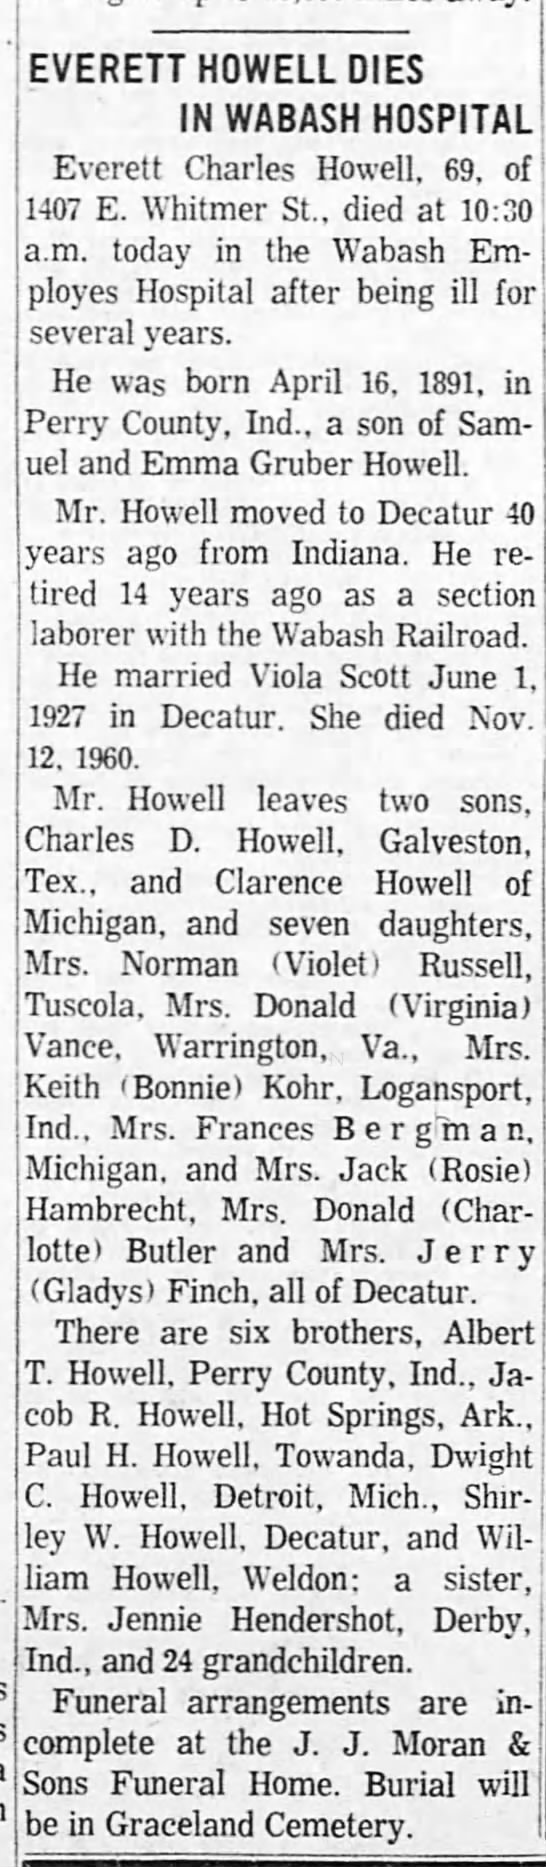 The Decatur Daily Review, Decatur, IL, 24 Feb 1961, pg 17